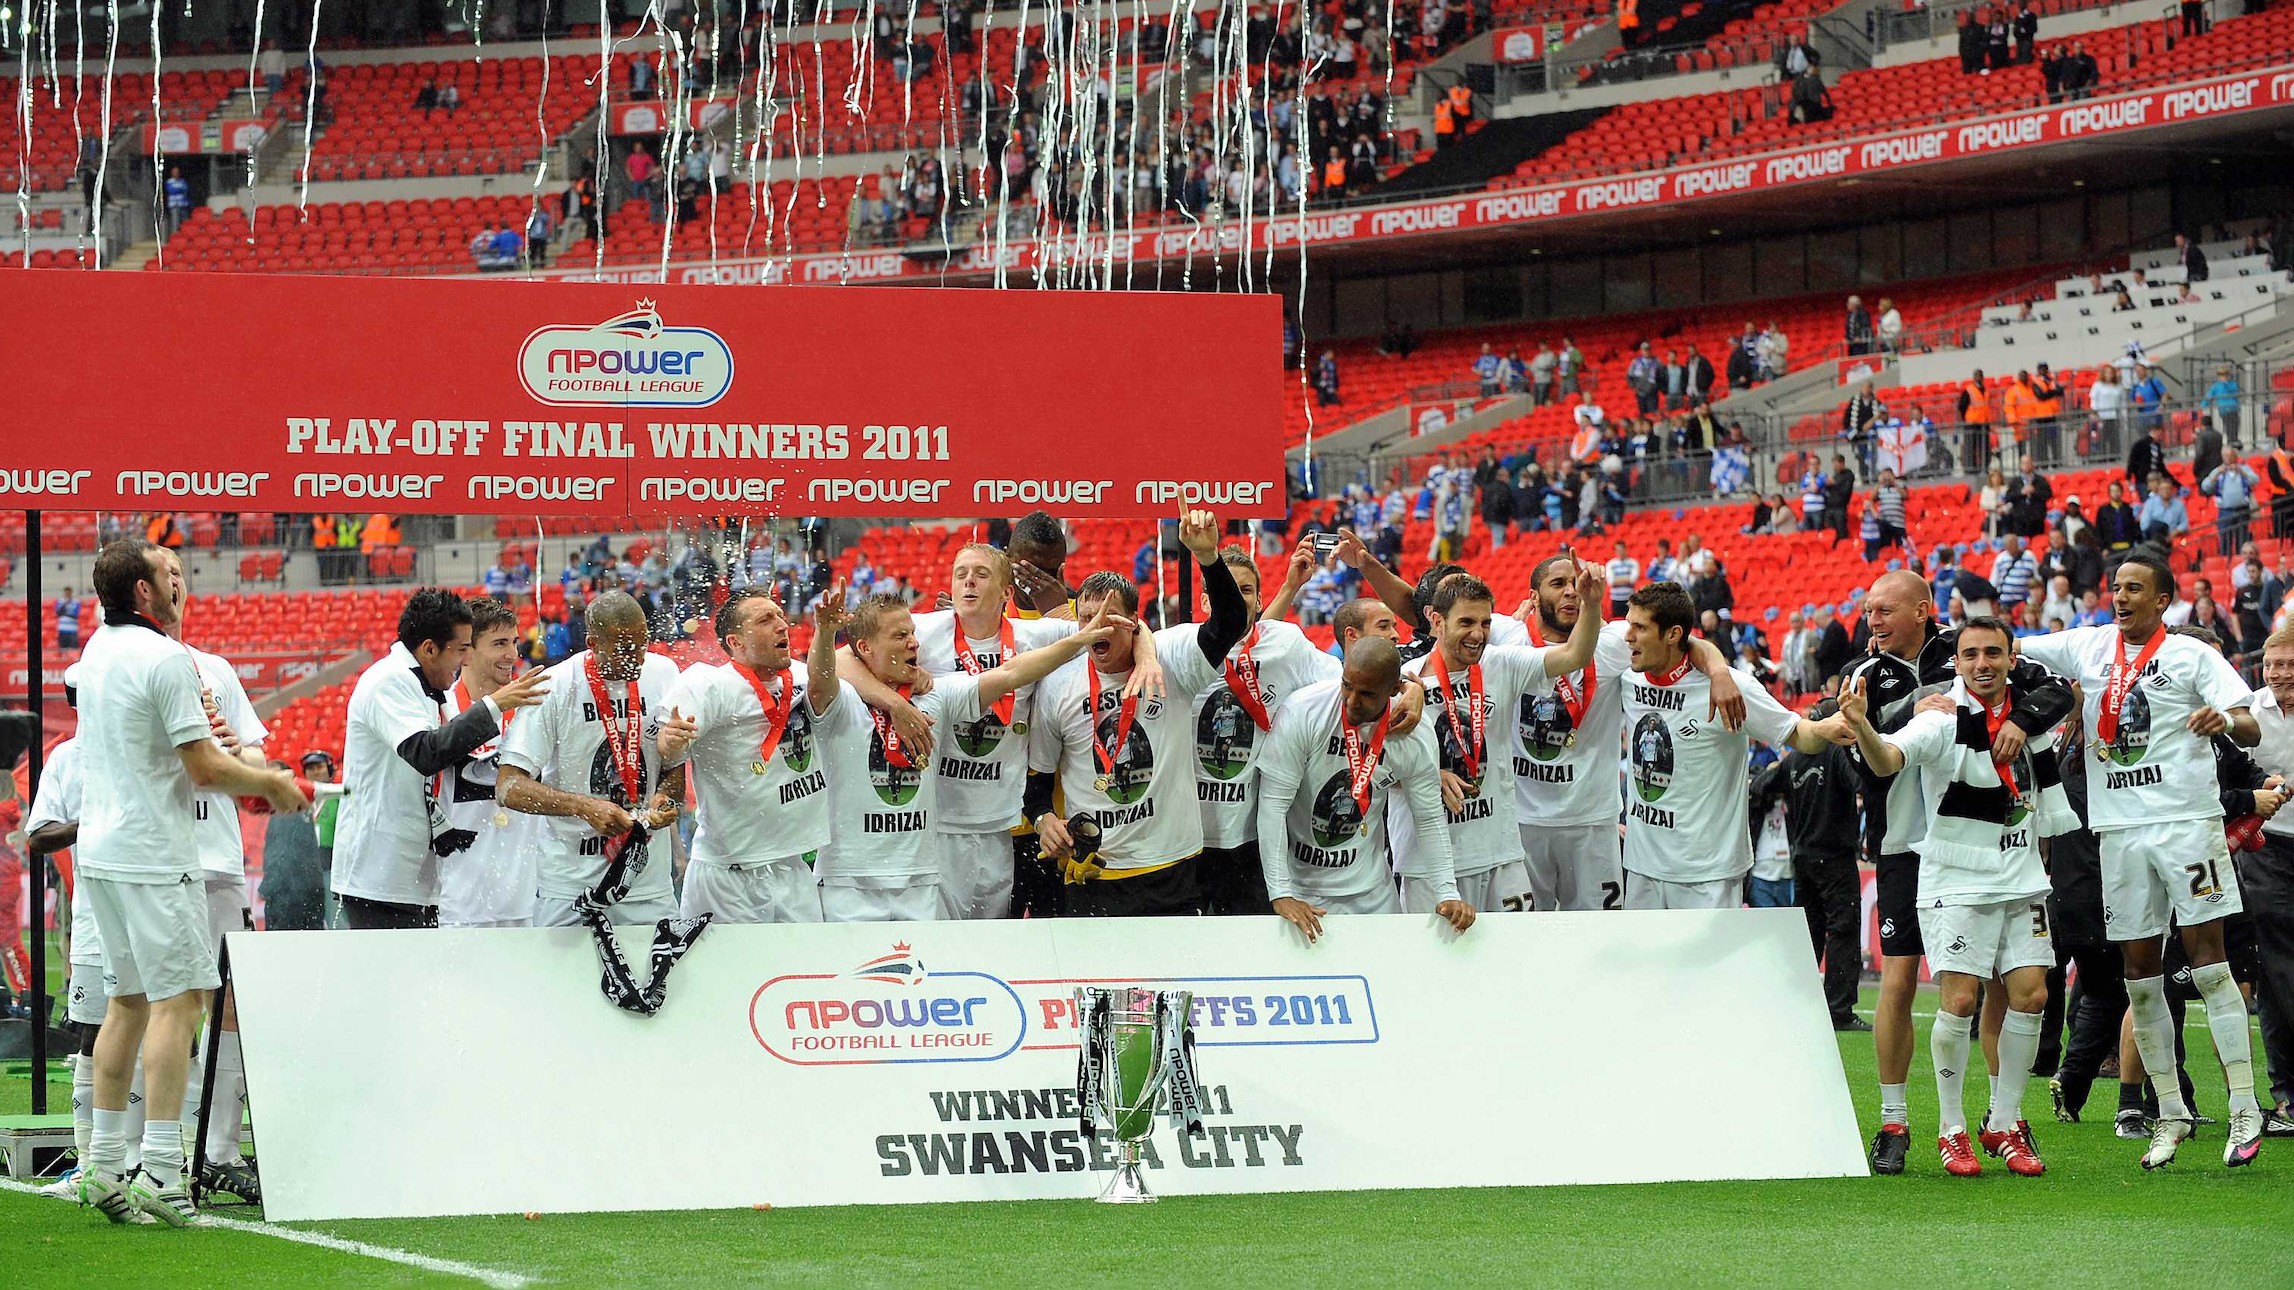 Swansea City lift the play-off trophy securing promotion to the Premier League